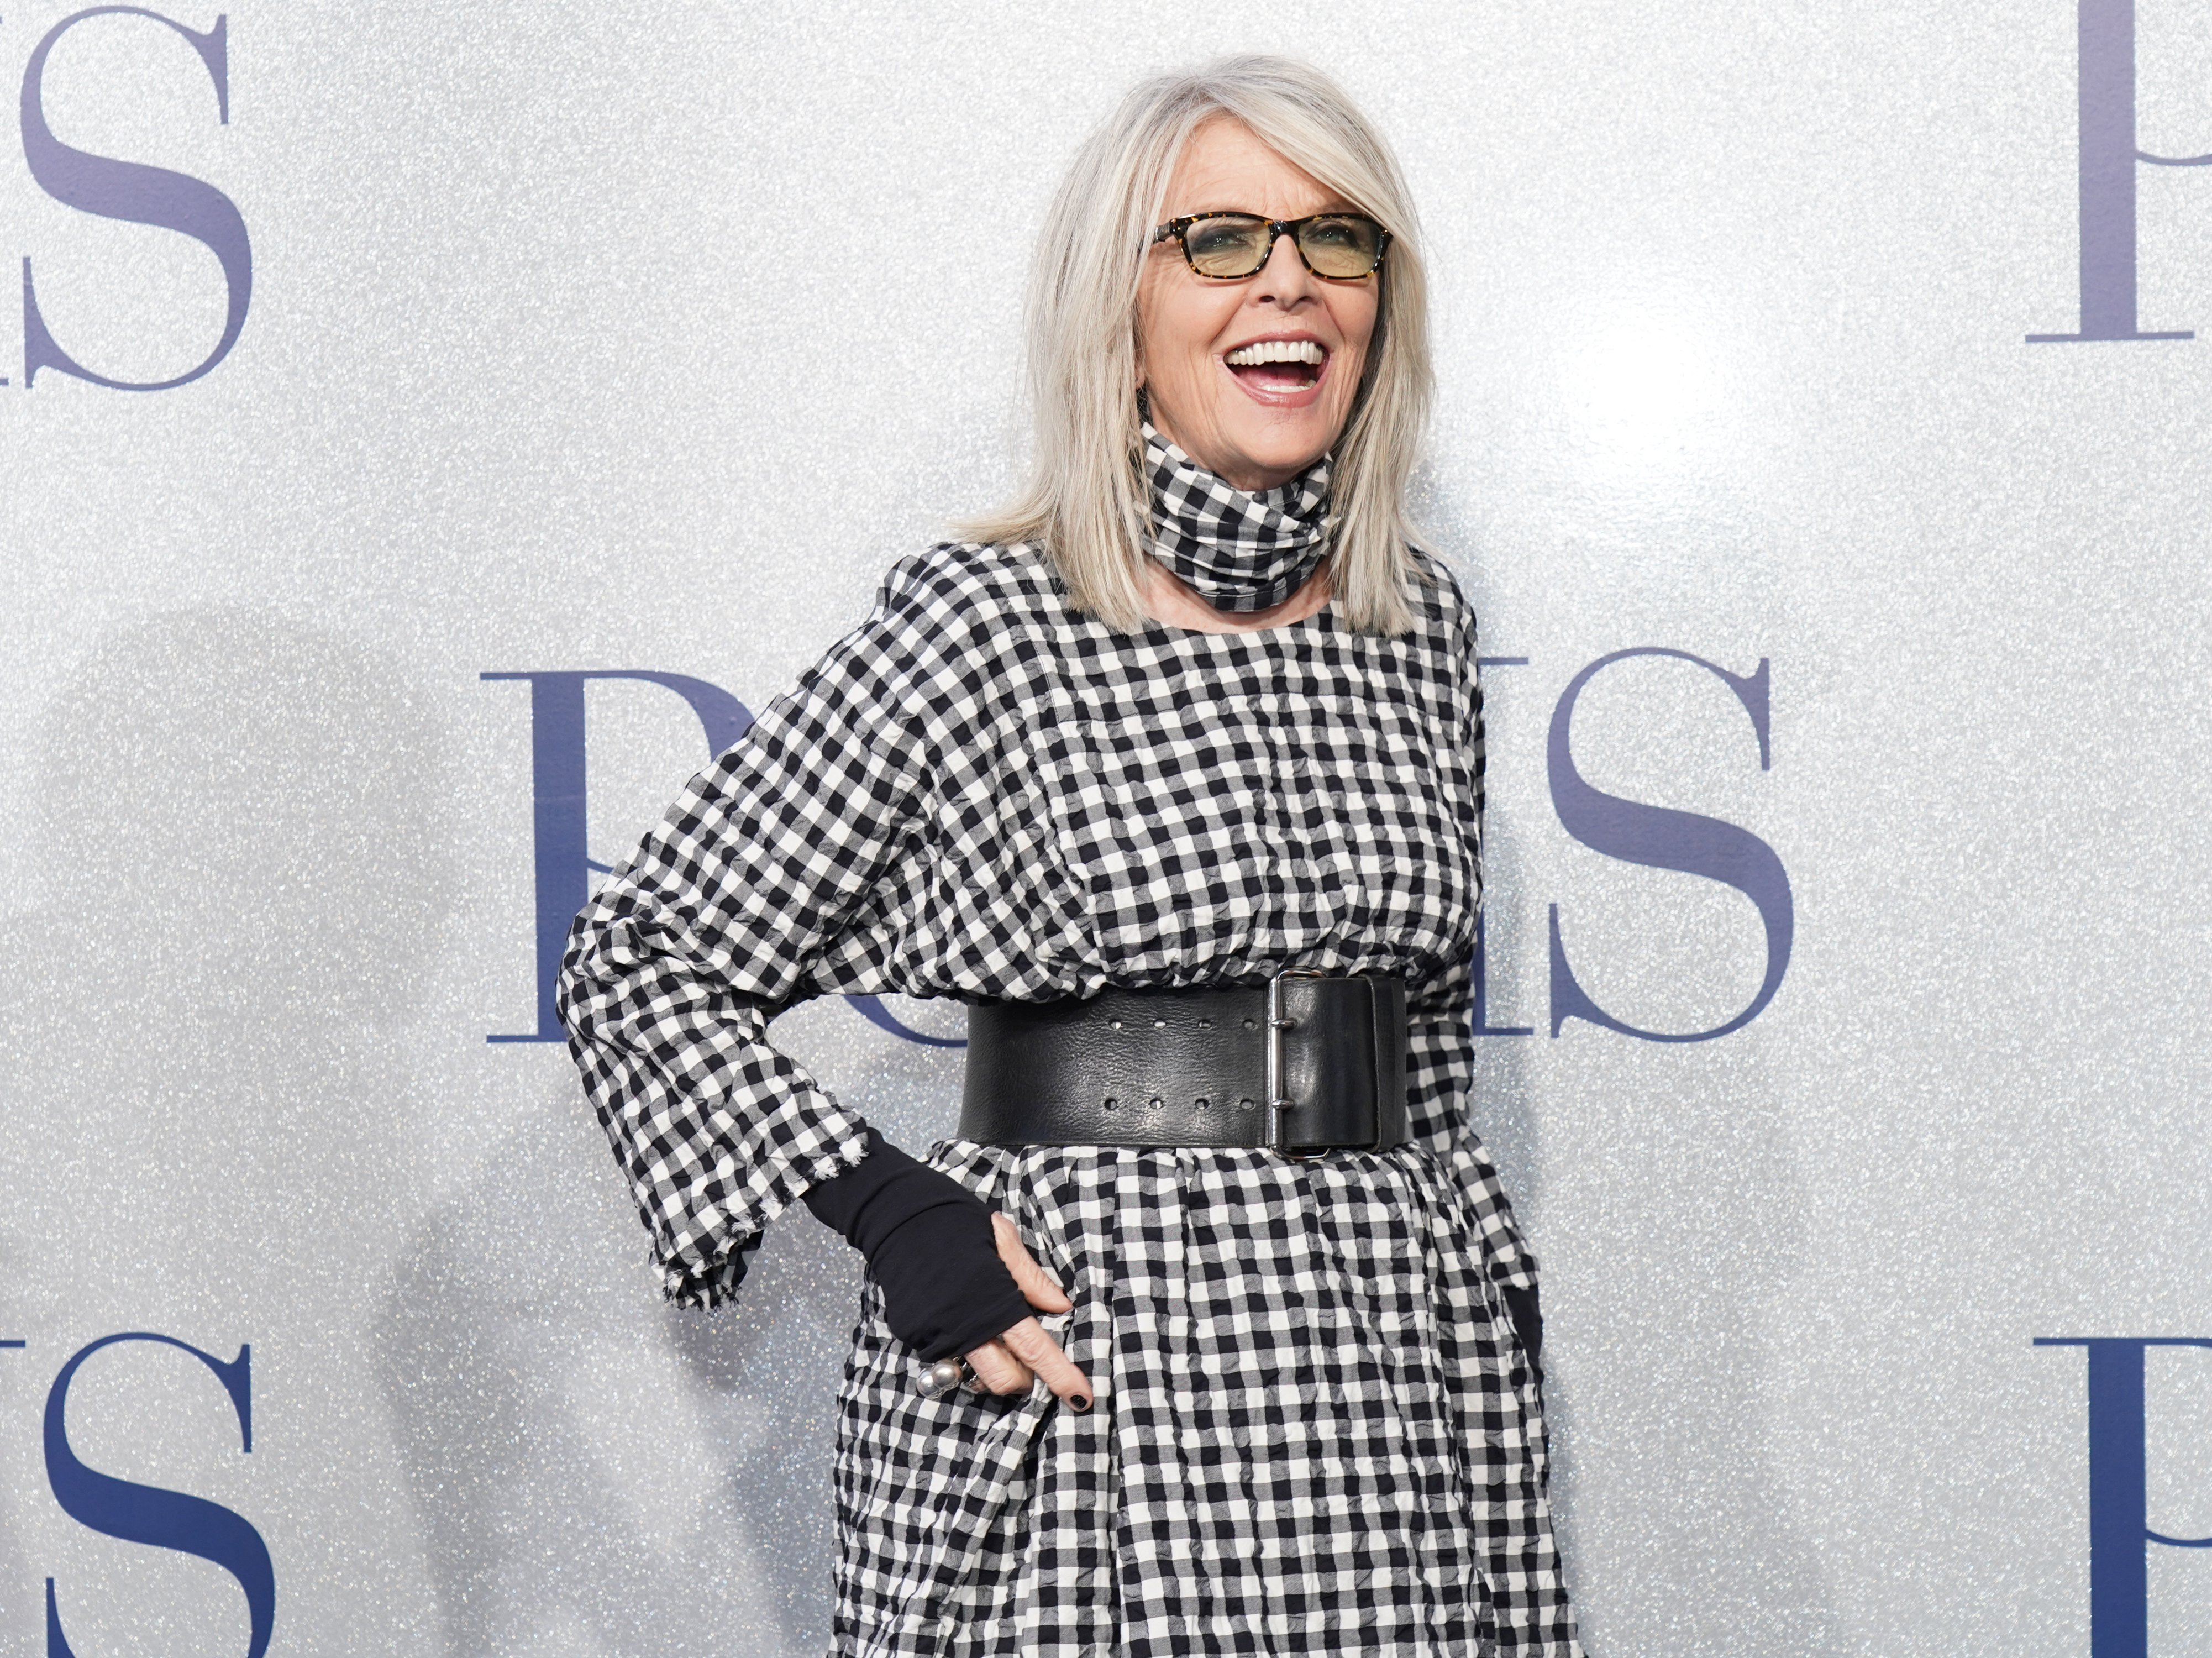 Diane Keaton attends the STX's "Poms" premiere at Regal LA Live on May 1, 2019, in Los Angeles, California. | Source: Getty Images